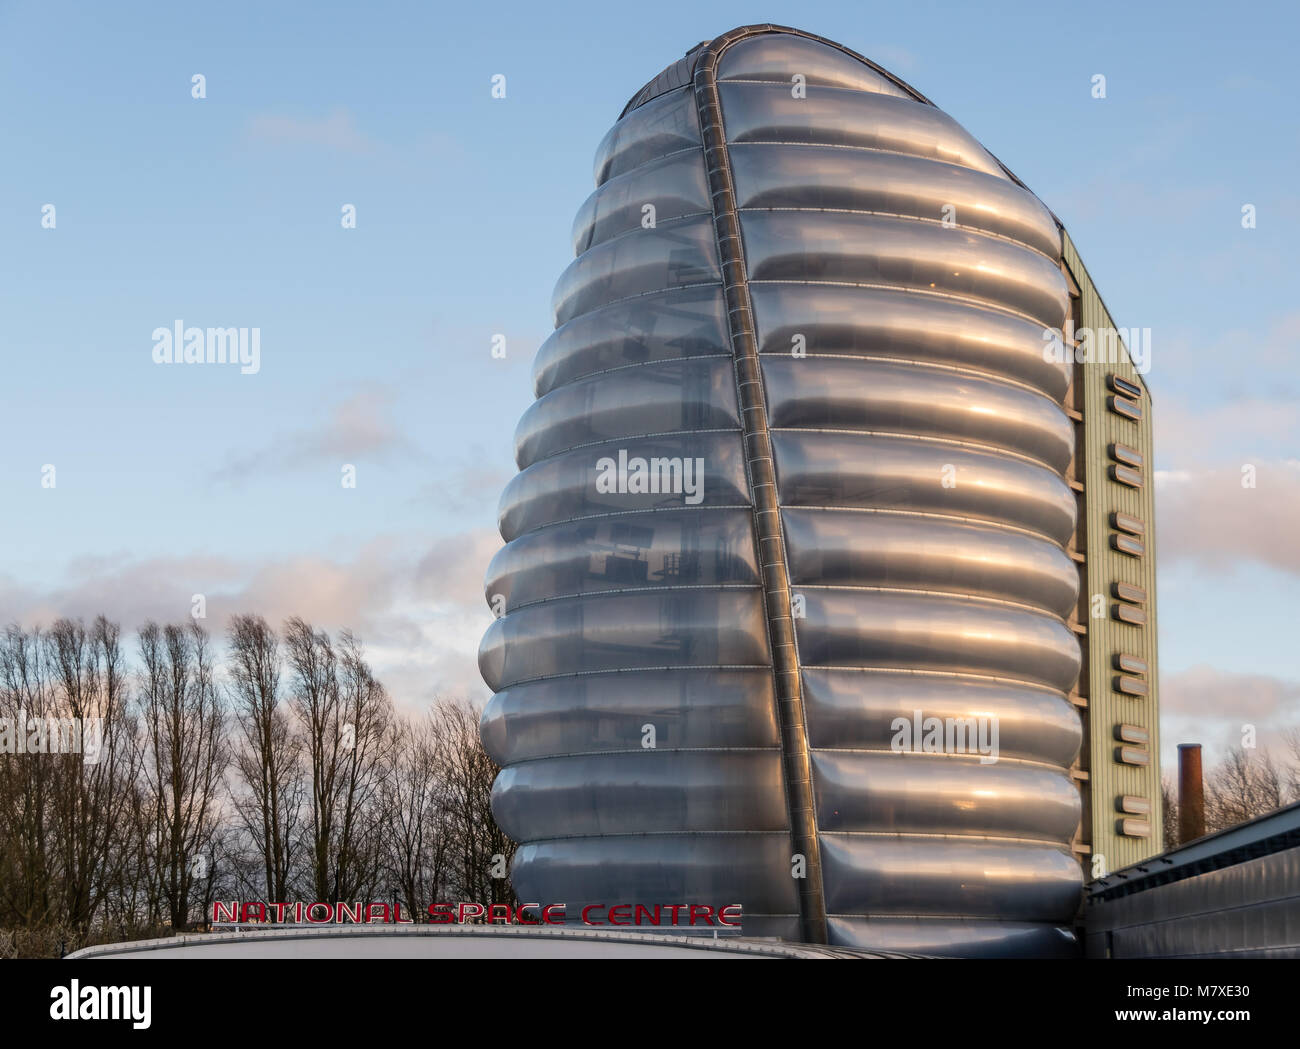 The National Space Centre in Liecester, UK Stock Photo